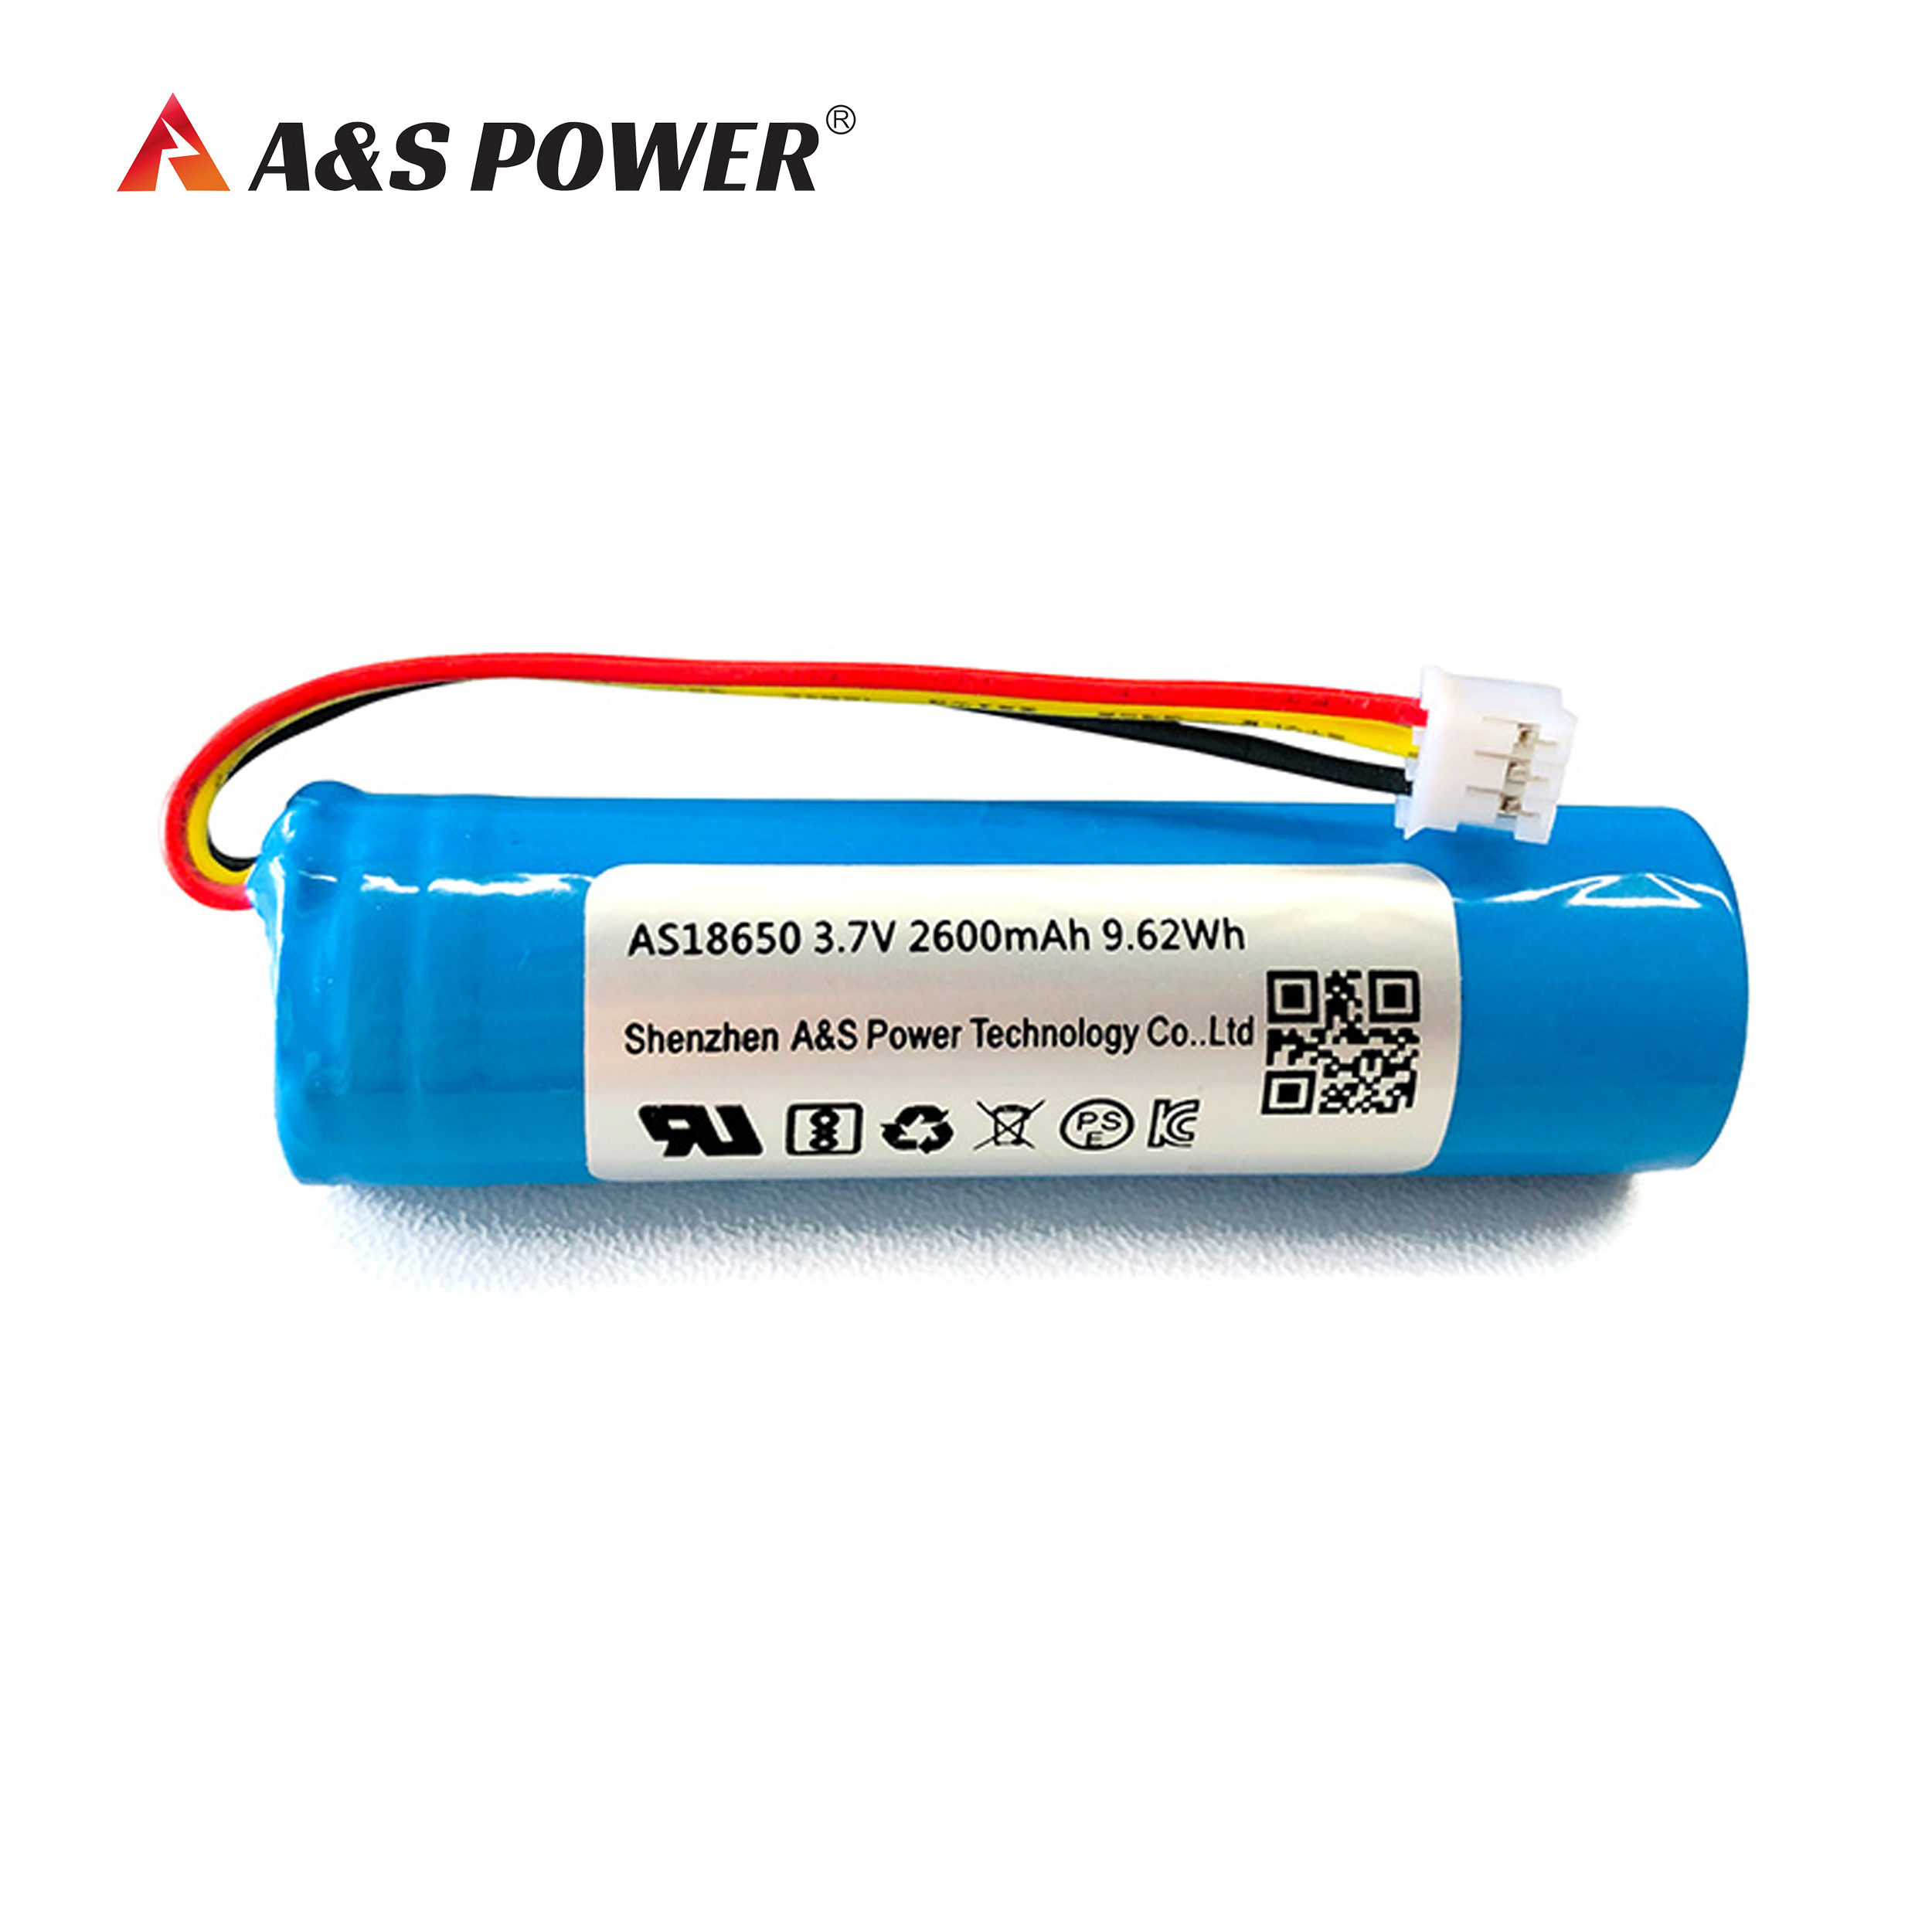 A&S Power 18650 3.7V 2600mAh lithium ion battery with UL2054/CB/KC/BIS certificate